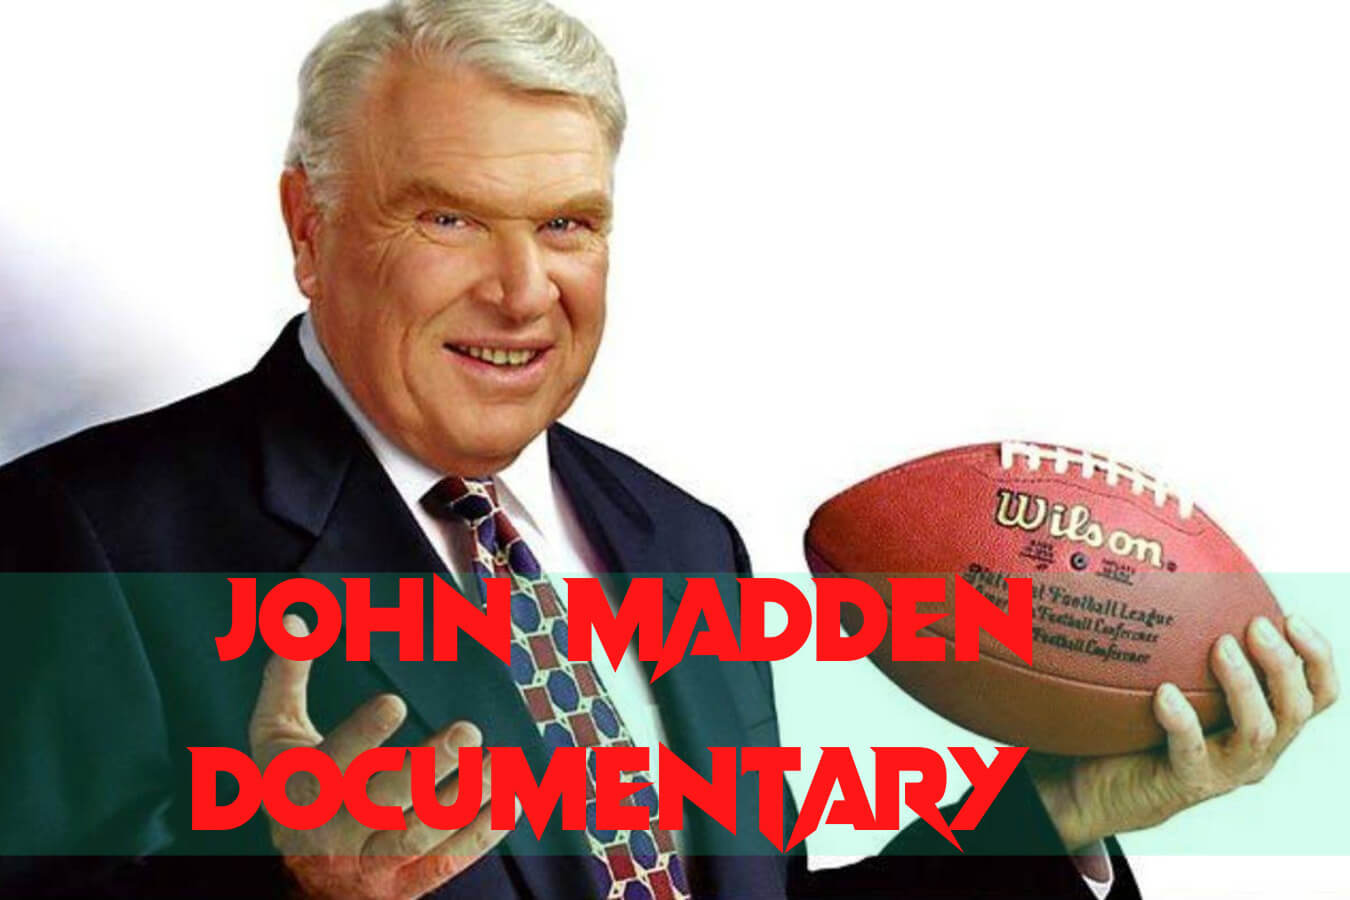 What is the current age of John Madden?